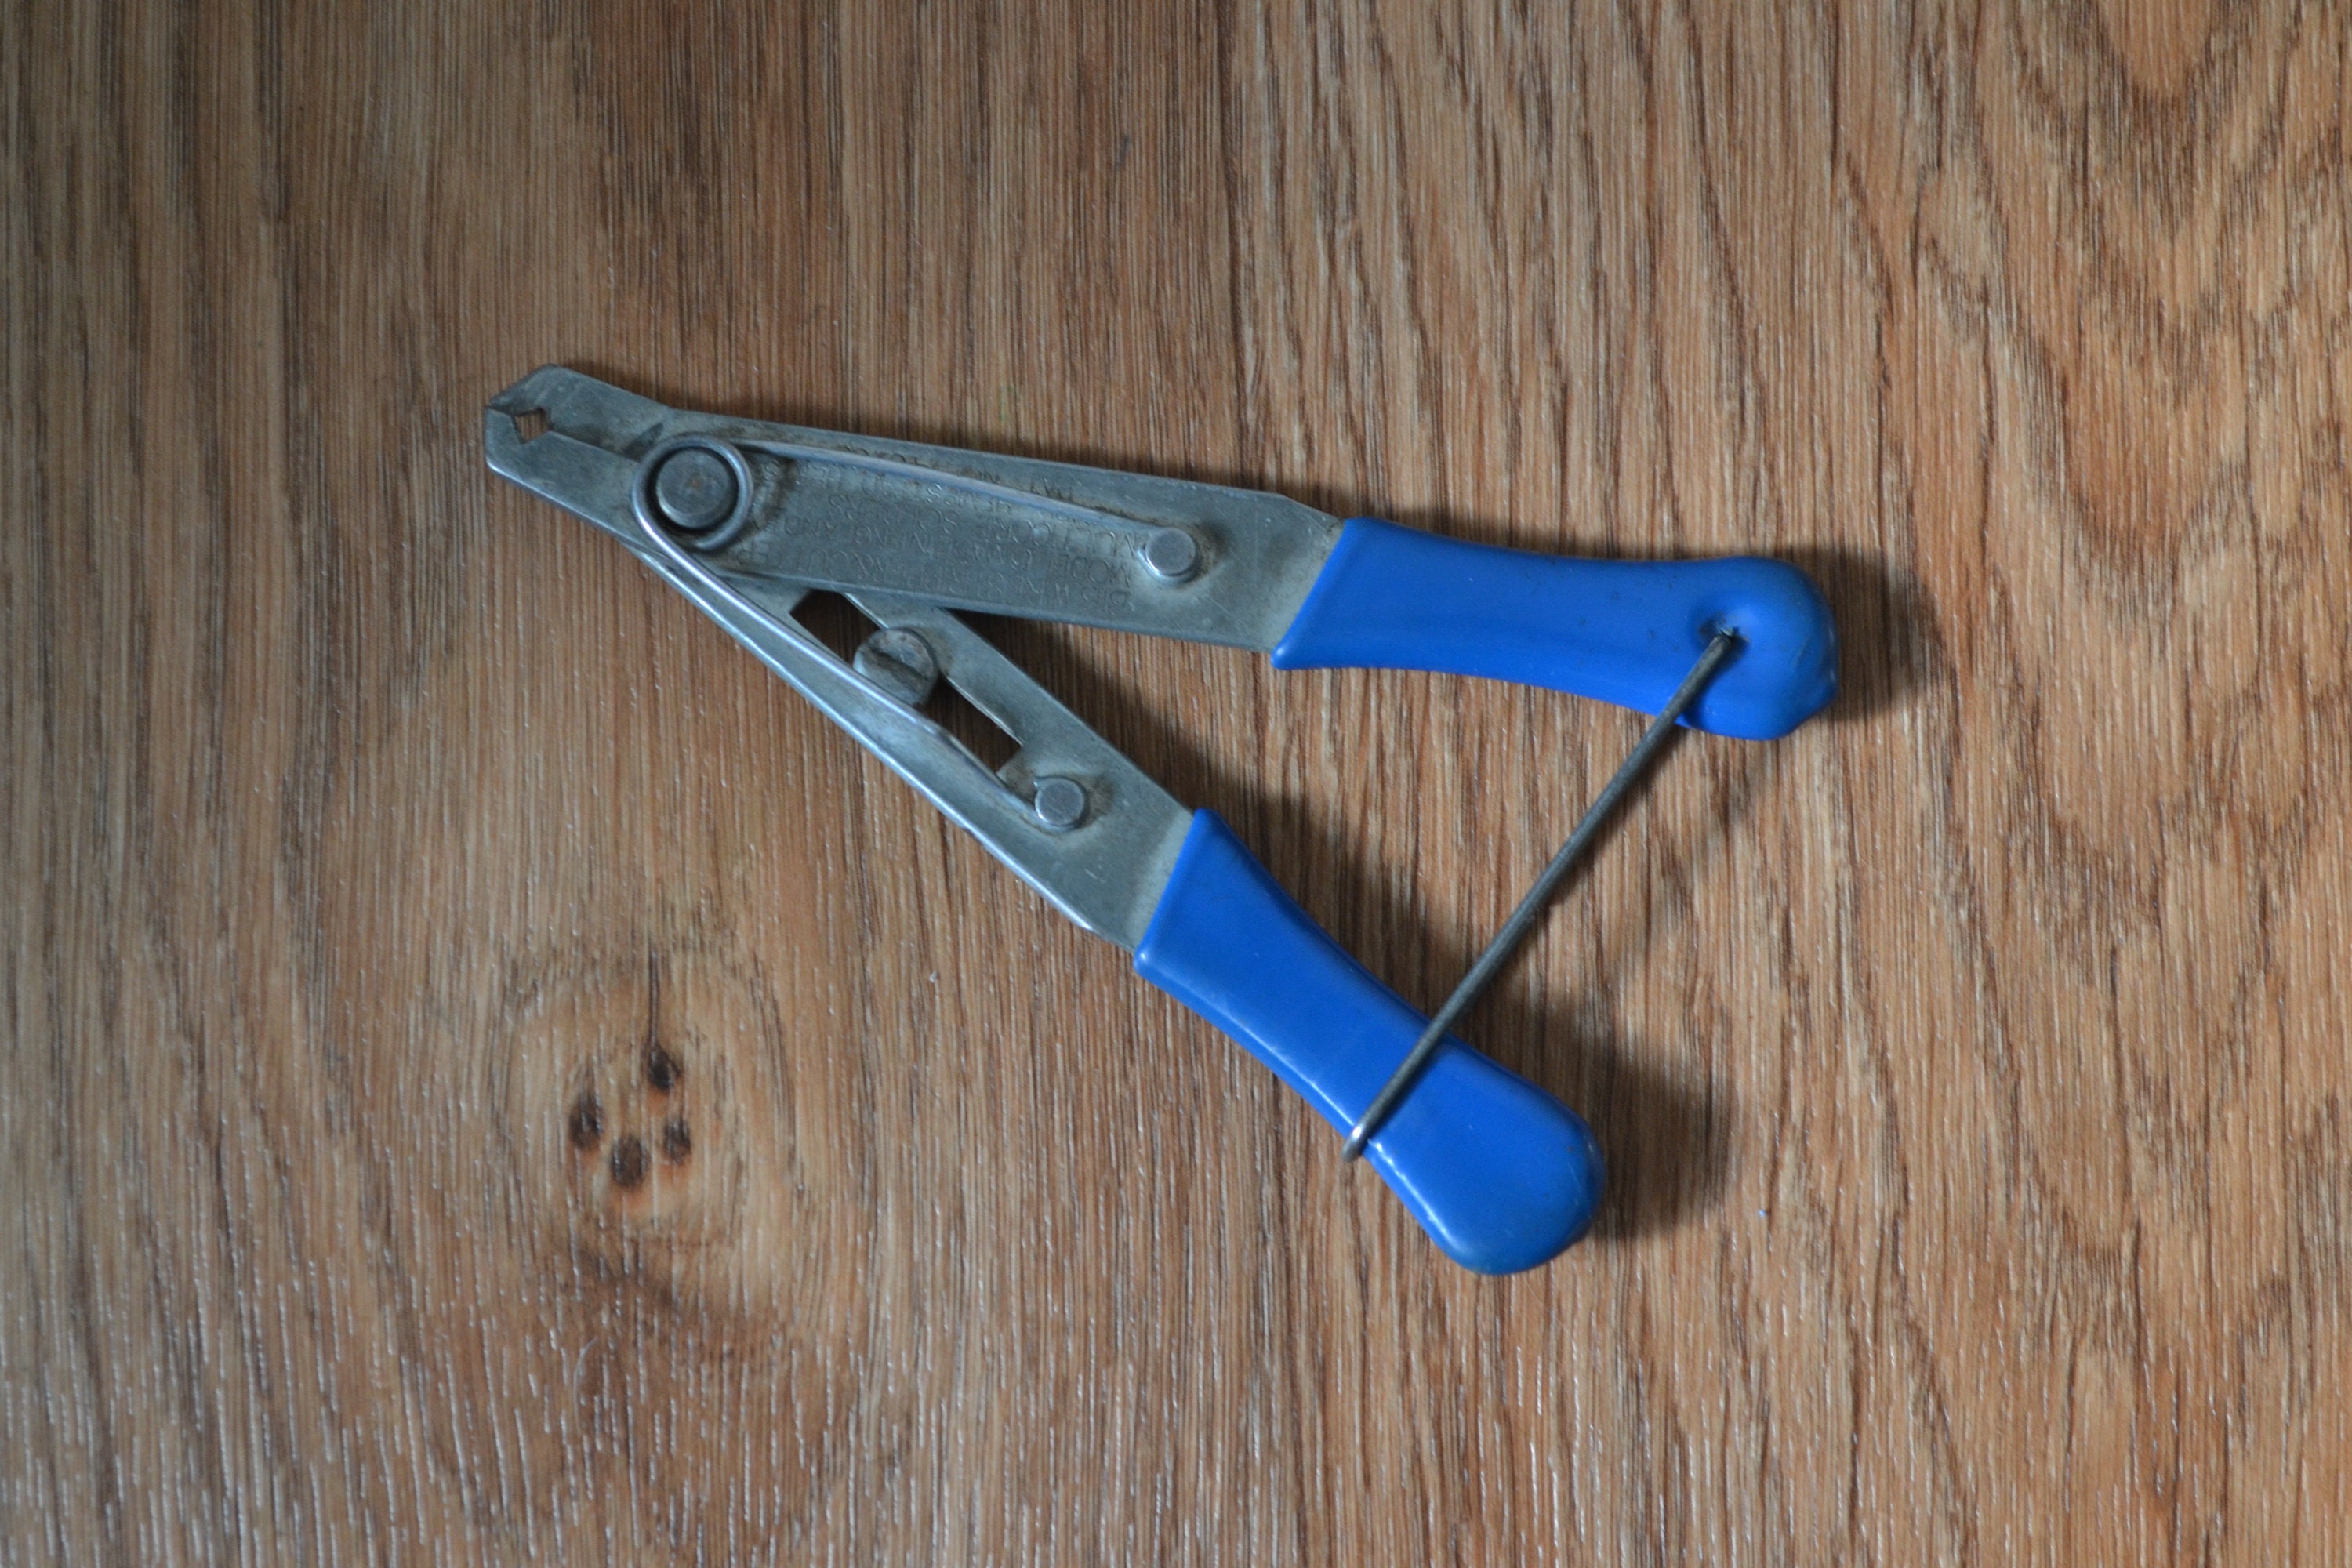 Solder Cutting Pliers by EURO TOOL, Cuts Sheet Solder in 1/16 1.60